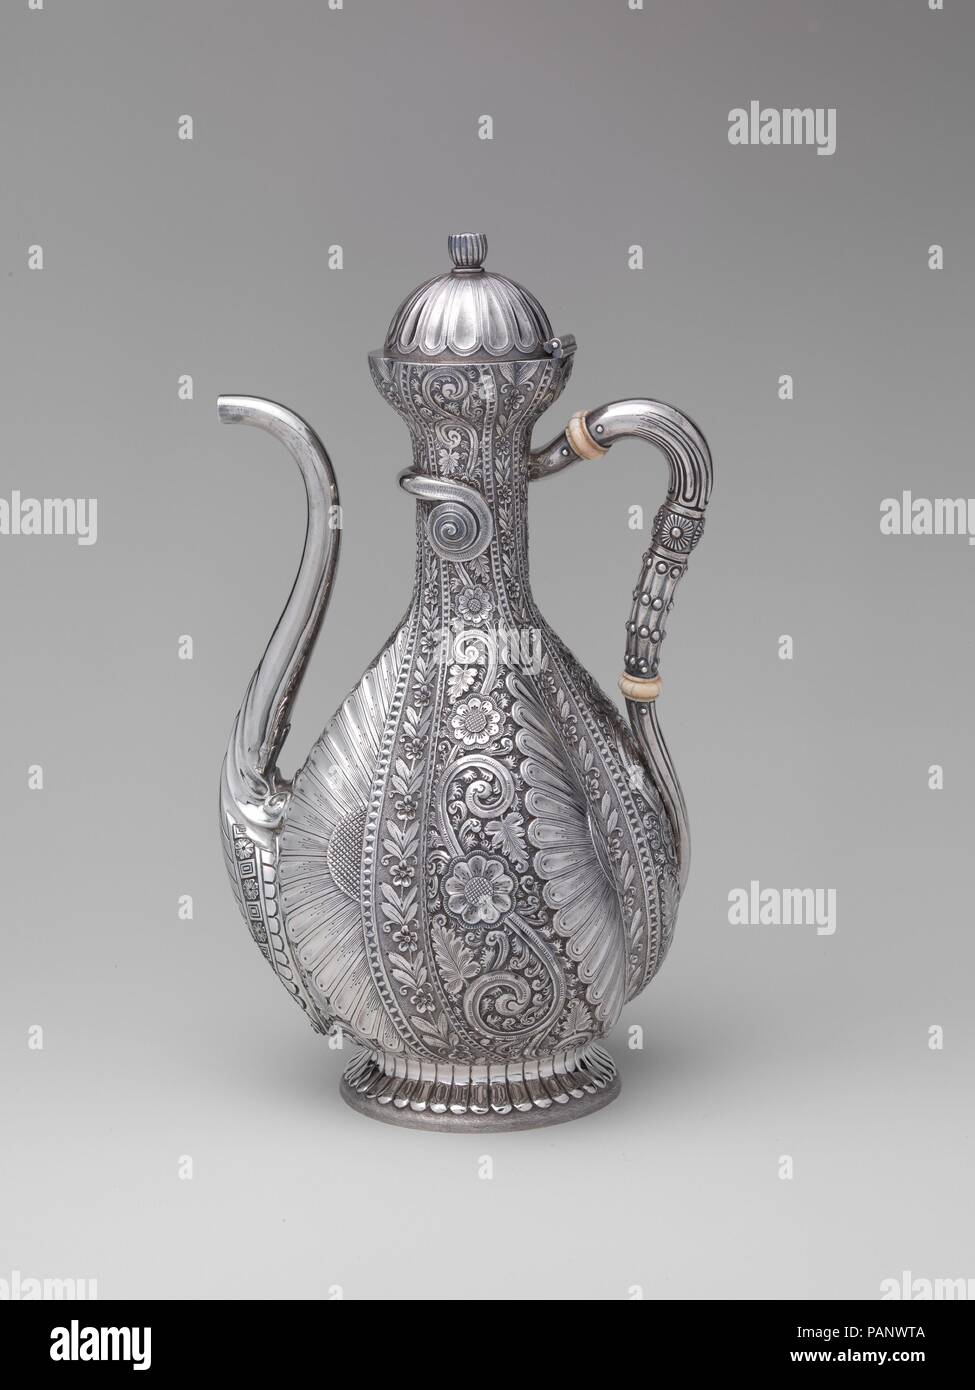 Coffeepot. Culture: American. Dimensions: 10 5/8 × 6 × 4 7/8 in., 30oz. 9dwt. (27 × 15.2 × 12.4 cm, 947.2g). Manufacturer: Gorham Manufacturing Company (American, 1831-present). Date: 1881.  Made as singular or limited production 'specials,' this sinuous coffee pot and tray epitomize the eclectic tastes and sensibilities that characterize the Aesthetic movement.  Here exotic near-eastern forms and decoration are combined with conventionalized plant motifs inspired by the British design reform movement.  The exquisitely crafted result is an inventive amalgam that is at once complex and coherent Stock Photo